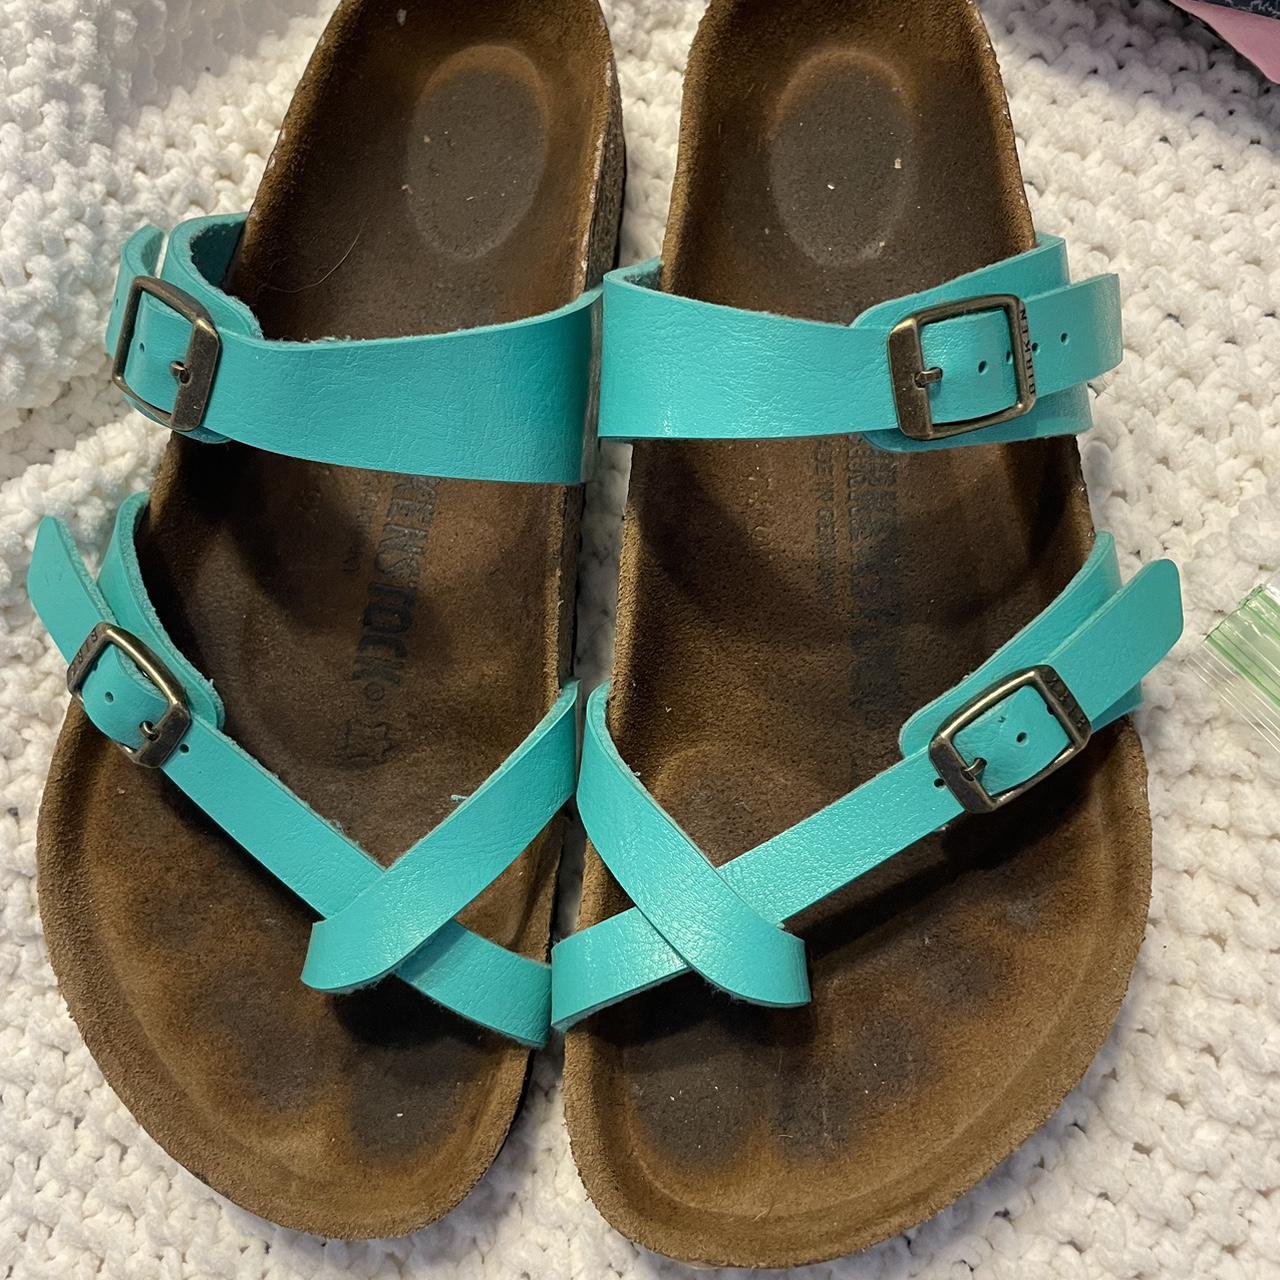 Birkenstocks - Teal (W8) Only signs of wear are the... - Depop